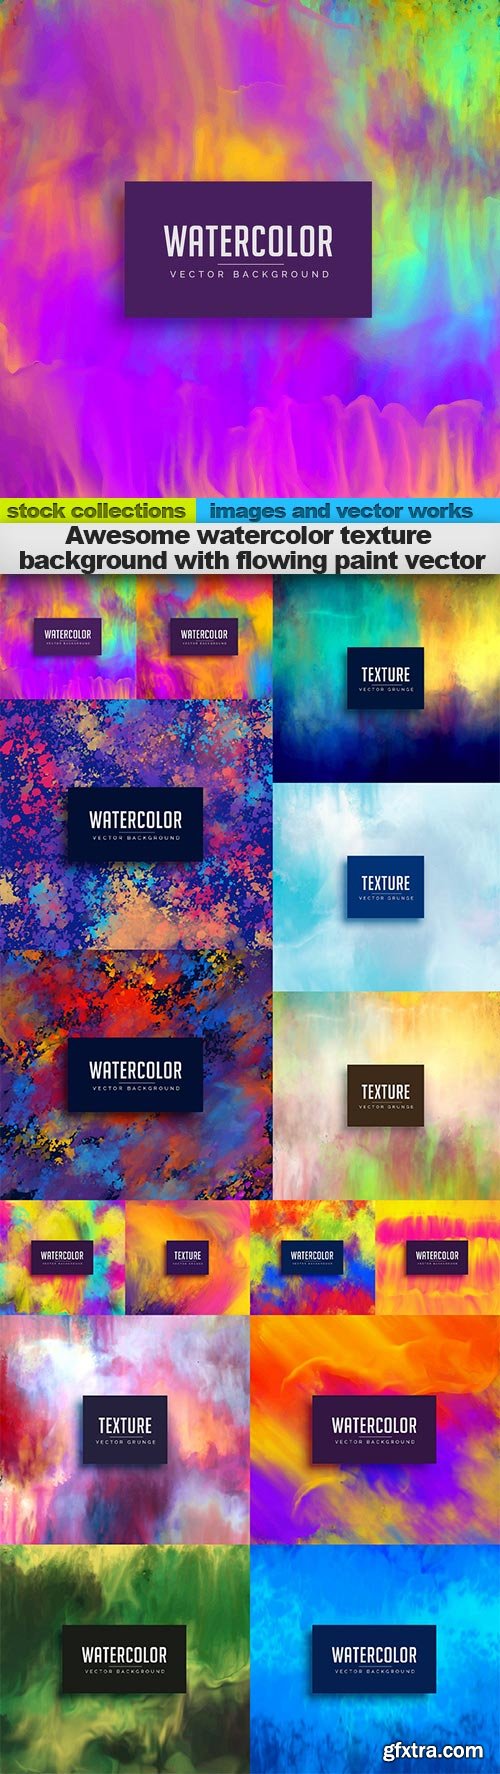 Awesome watercolor texture background with flowing paint vector,  15 x EPS